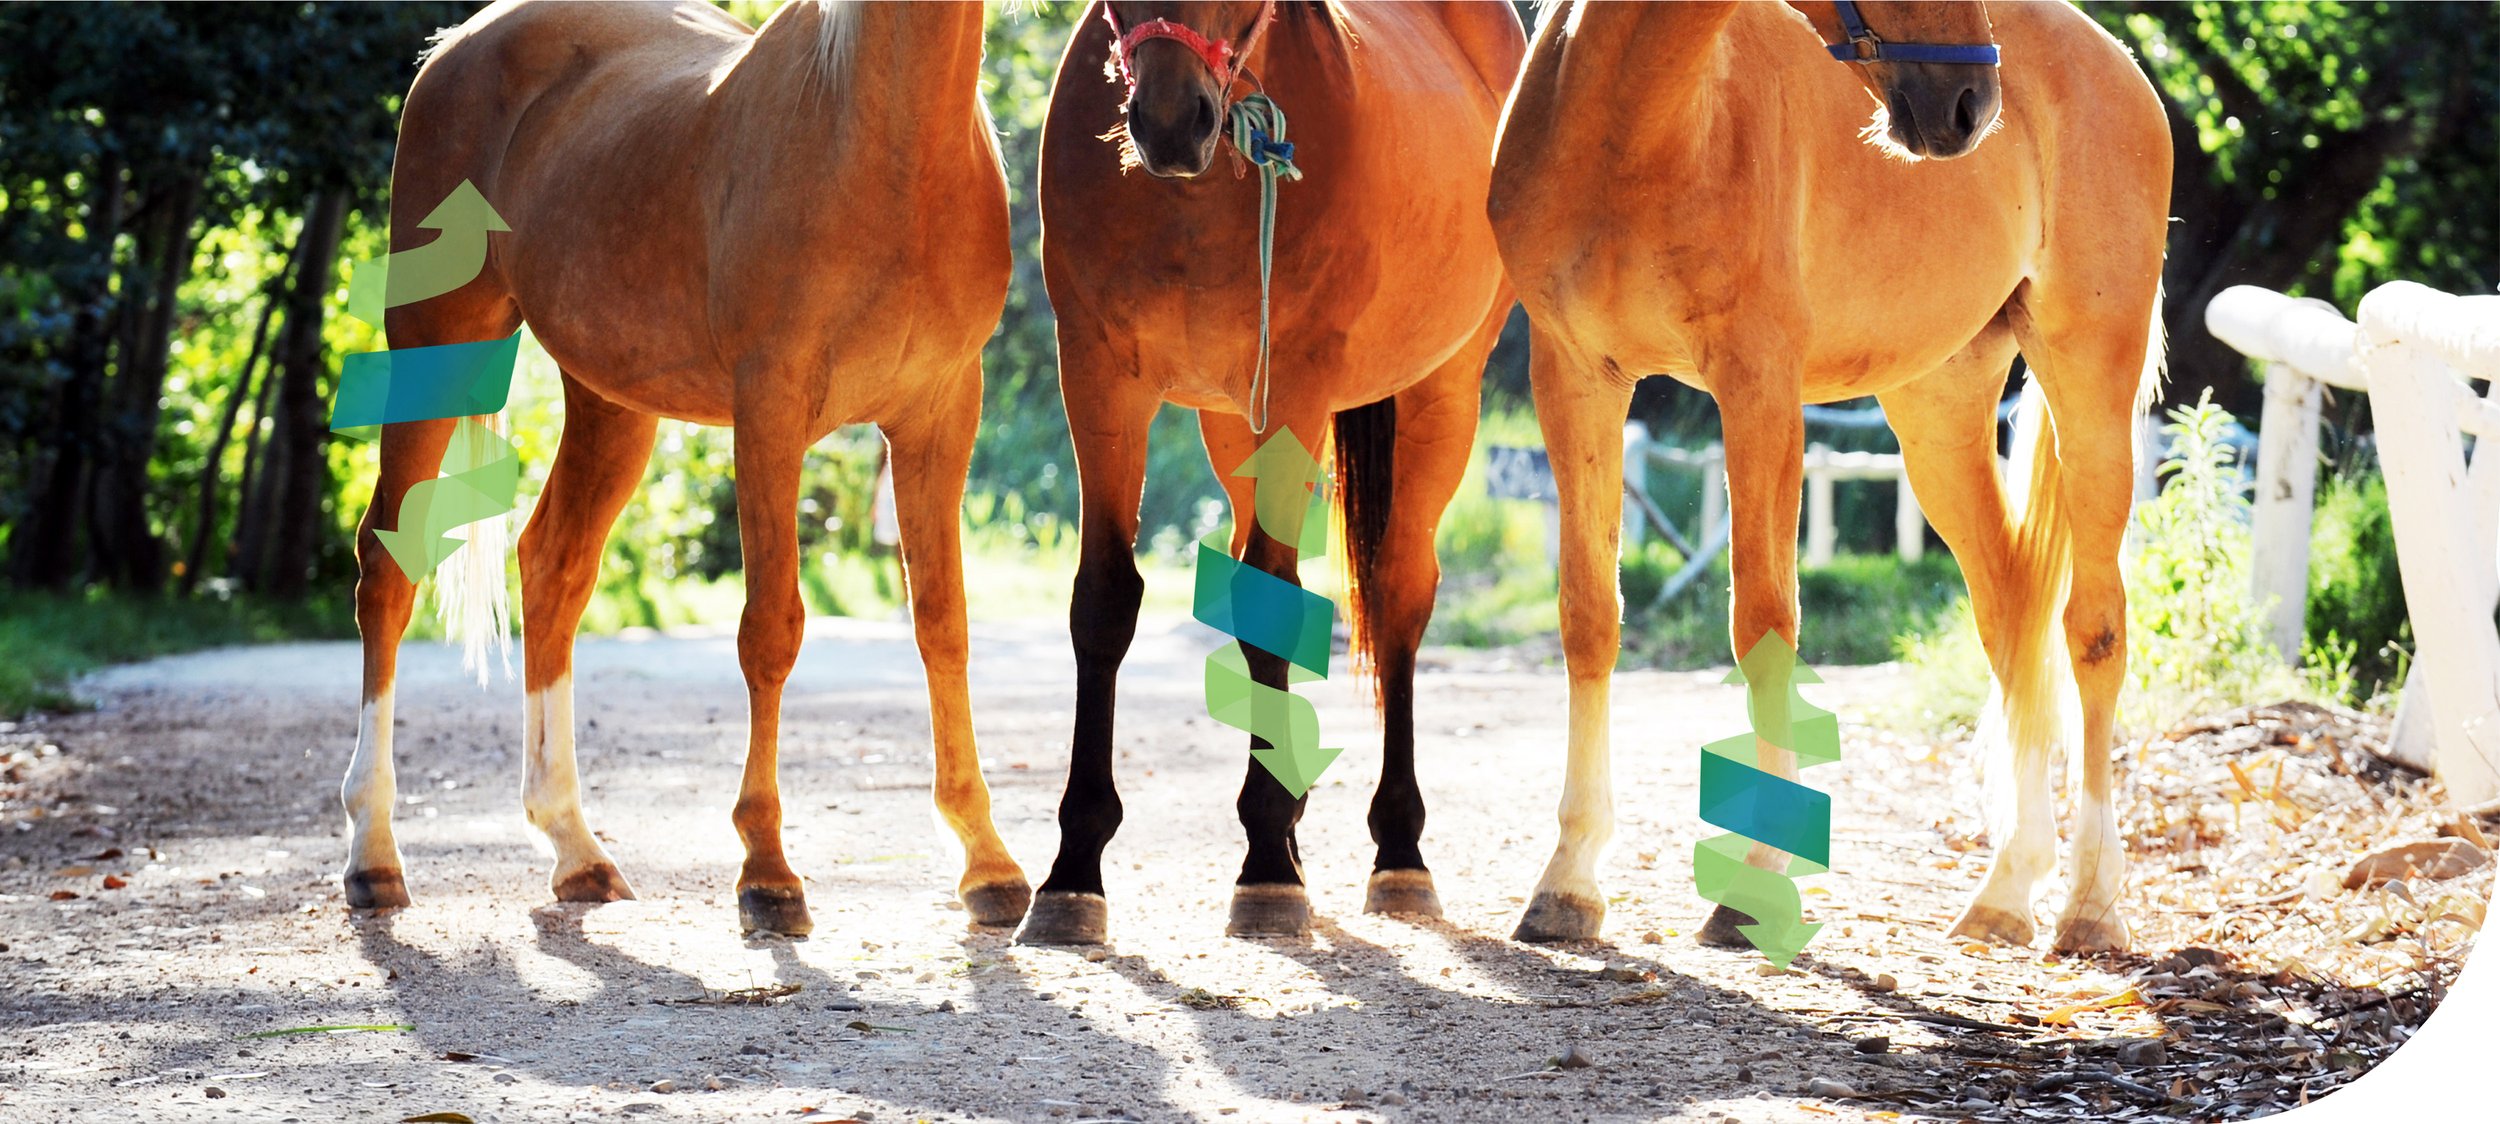 Equine Veterinary Services - Health - Needles: Which one do I use?